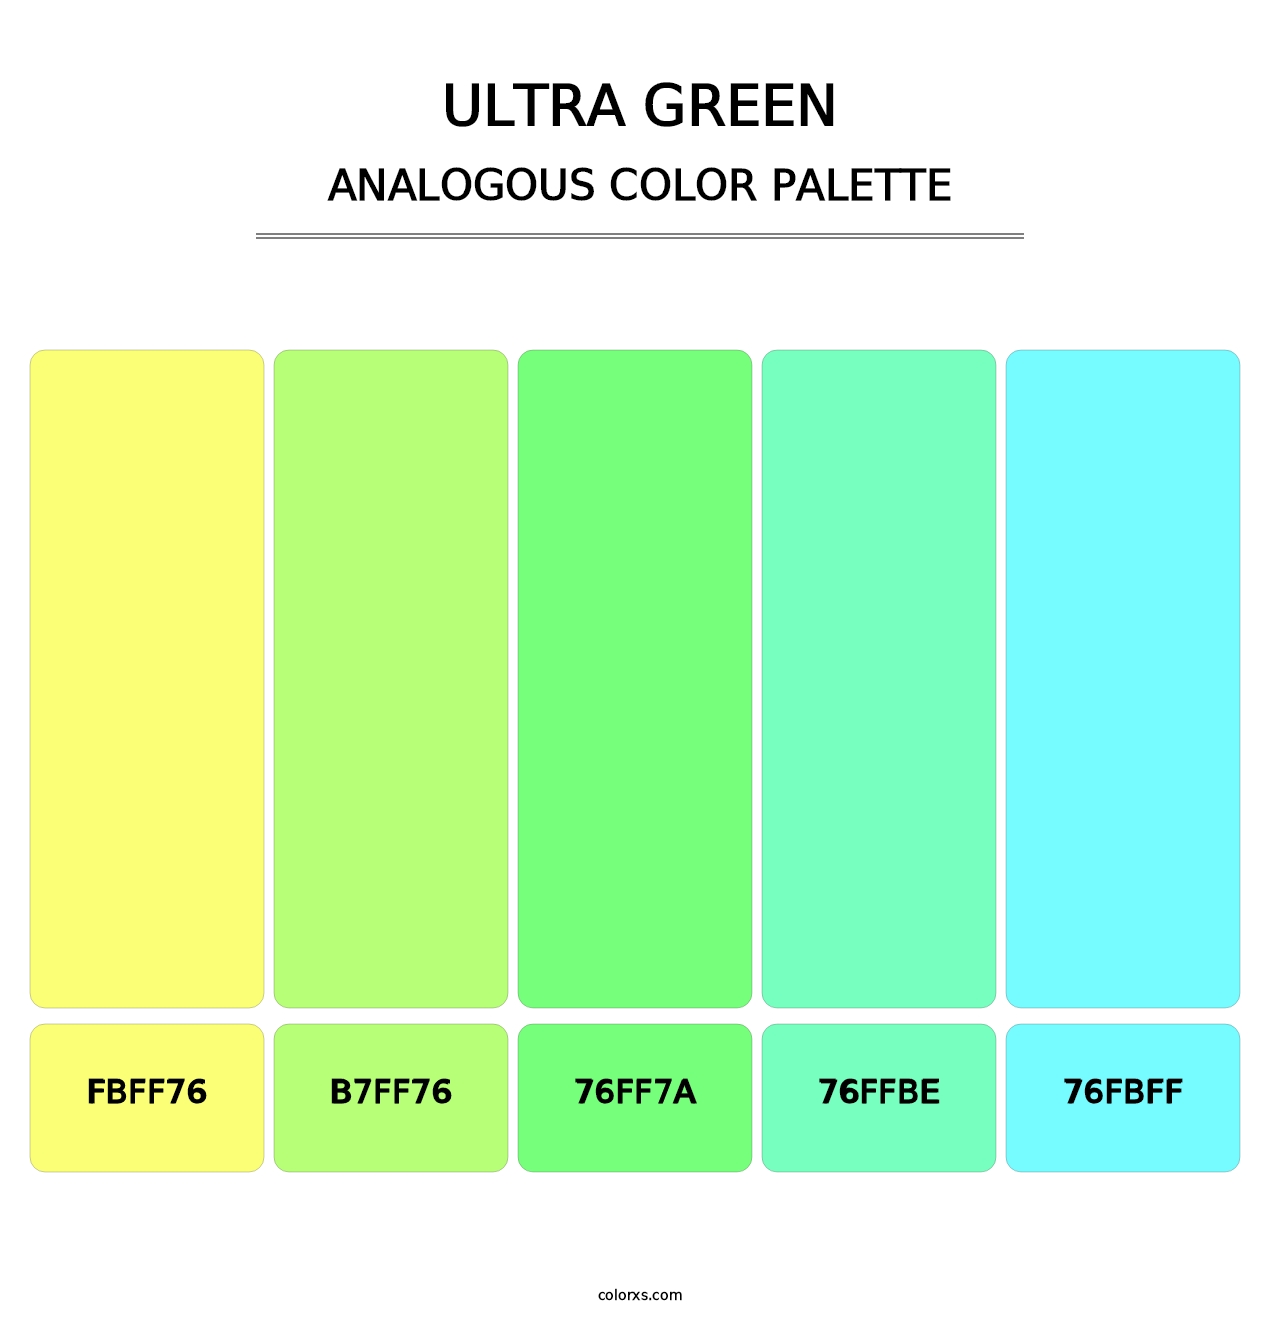 Ultra Green - Analogous Color Palette